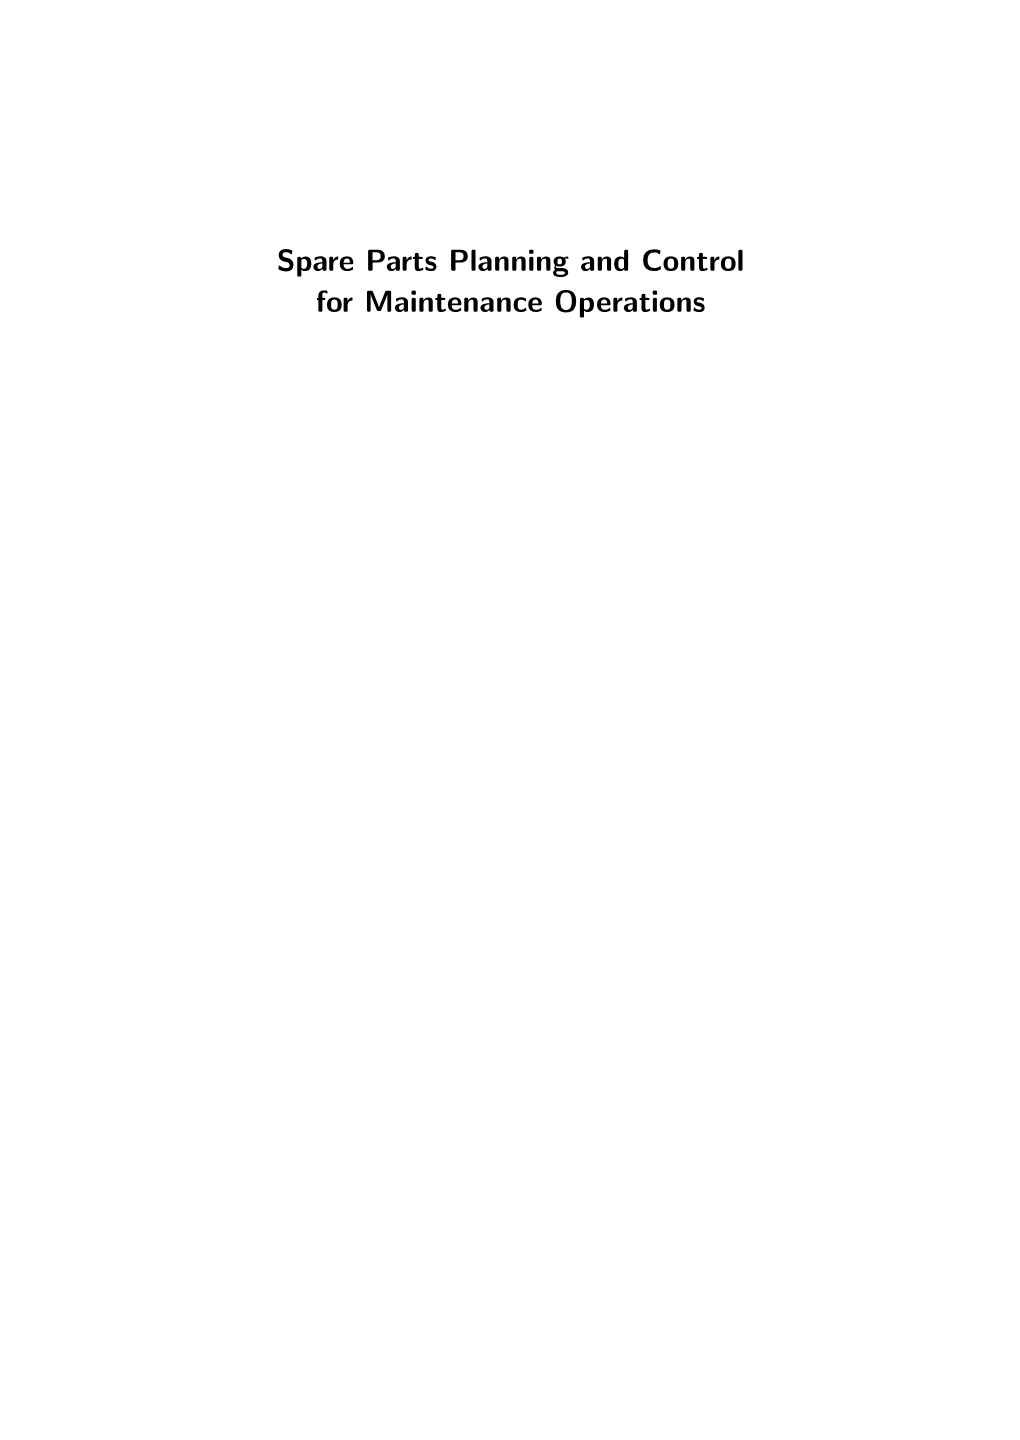 Spare Parts Planning and Control for Maintenance Operations